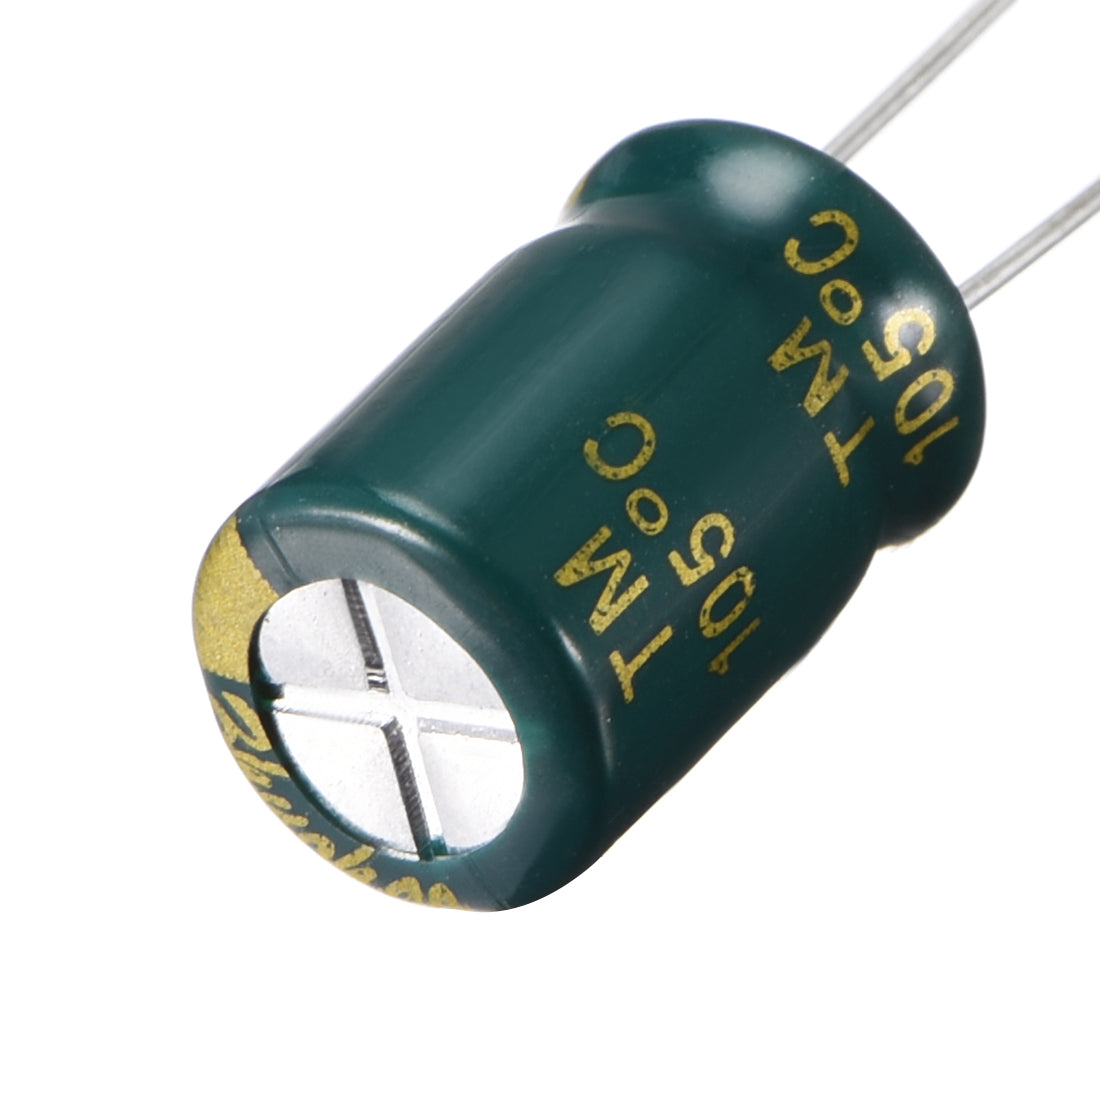 uxcell Uxcell Aluminum Radial Electrolytic Capacitor Low ESR Green with 220UF 35V 105 Celsius Life 3000H 8 x 12 mm High Ripple Current,Low Impedance 80pcs